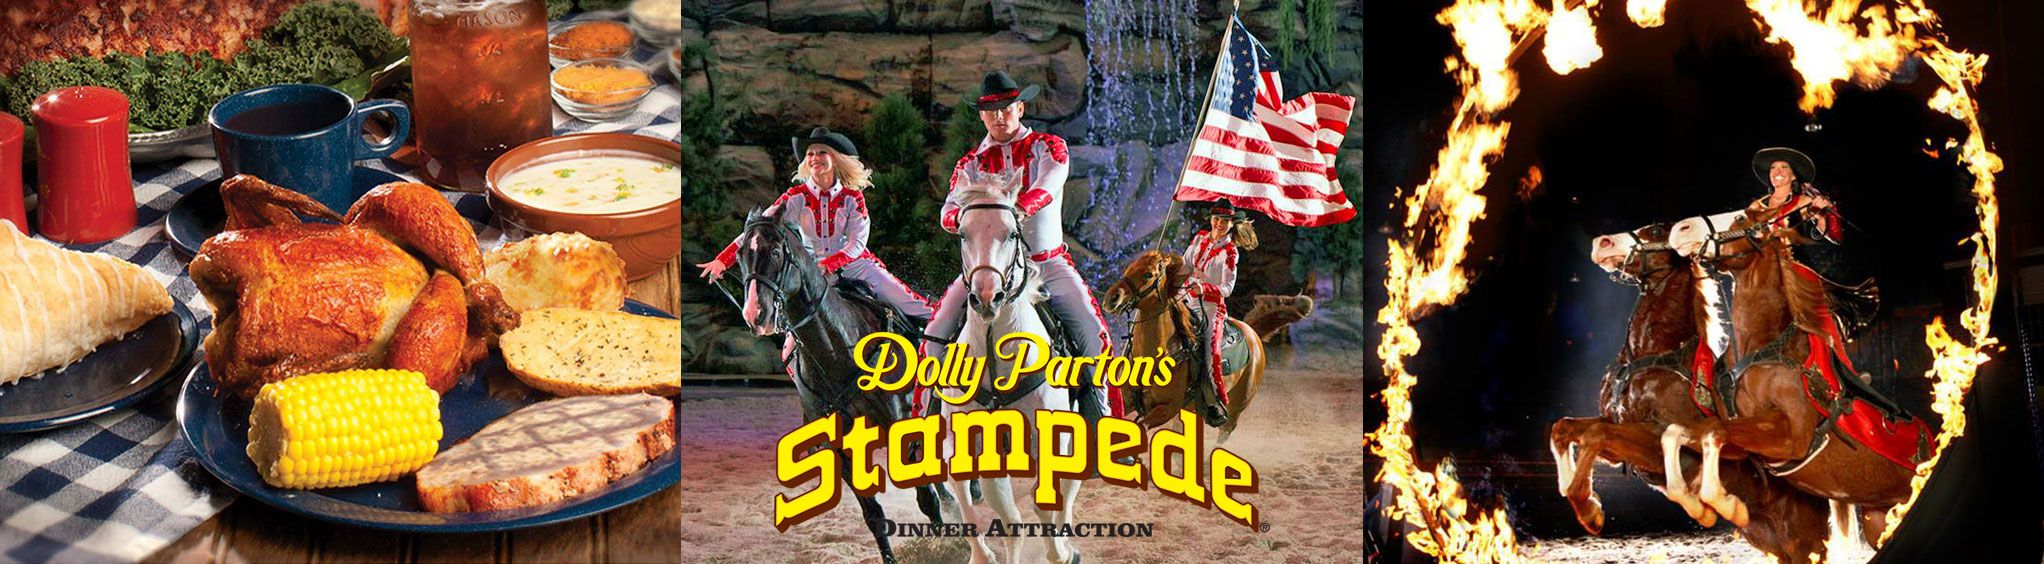 Dolly Parton's Stampede Theater